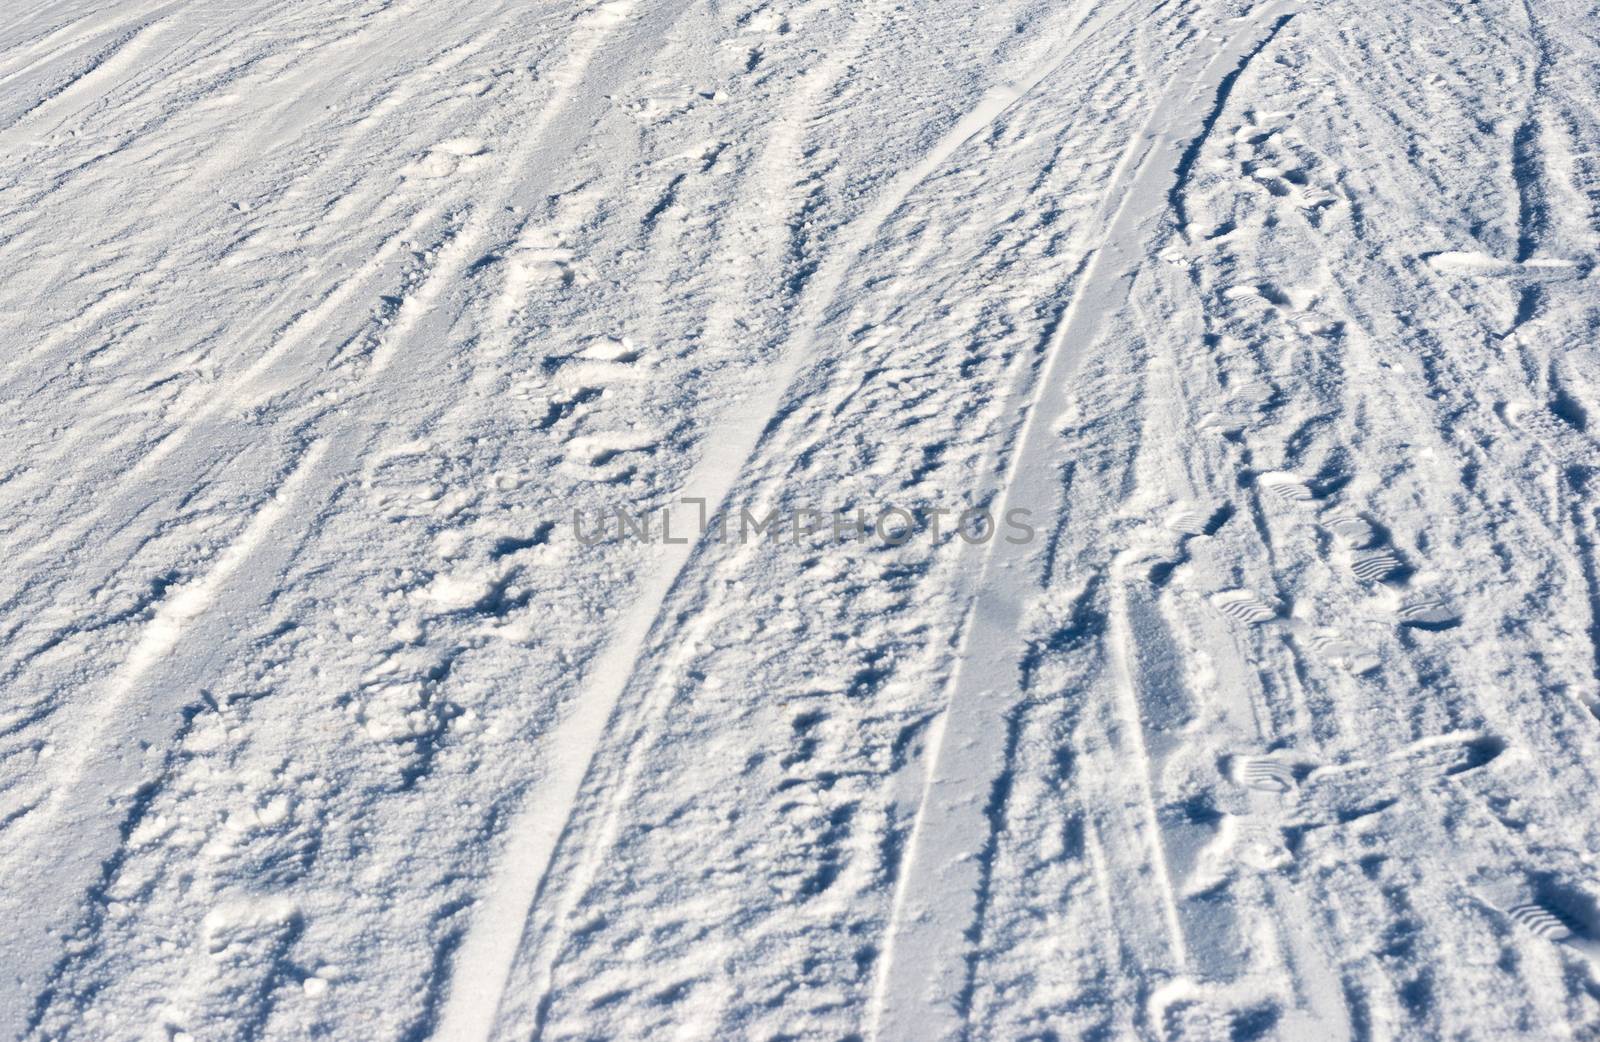 Closeup photo of skis marks on snow slope